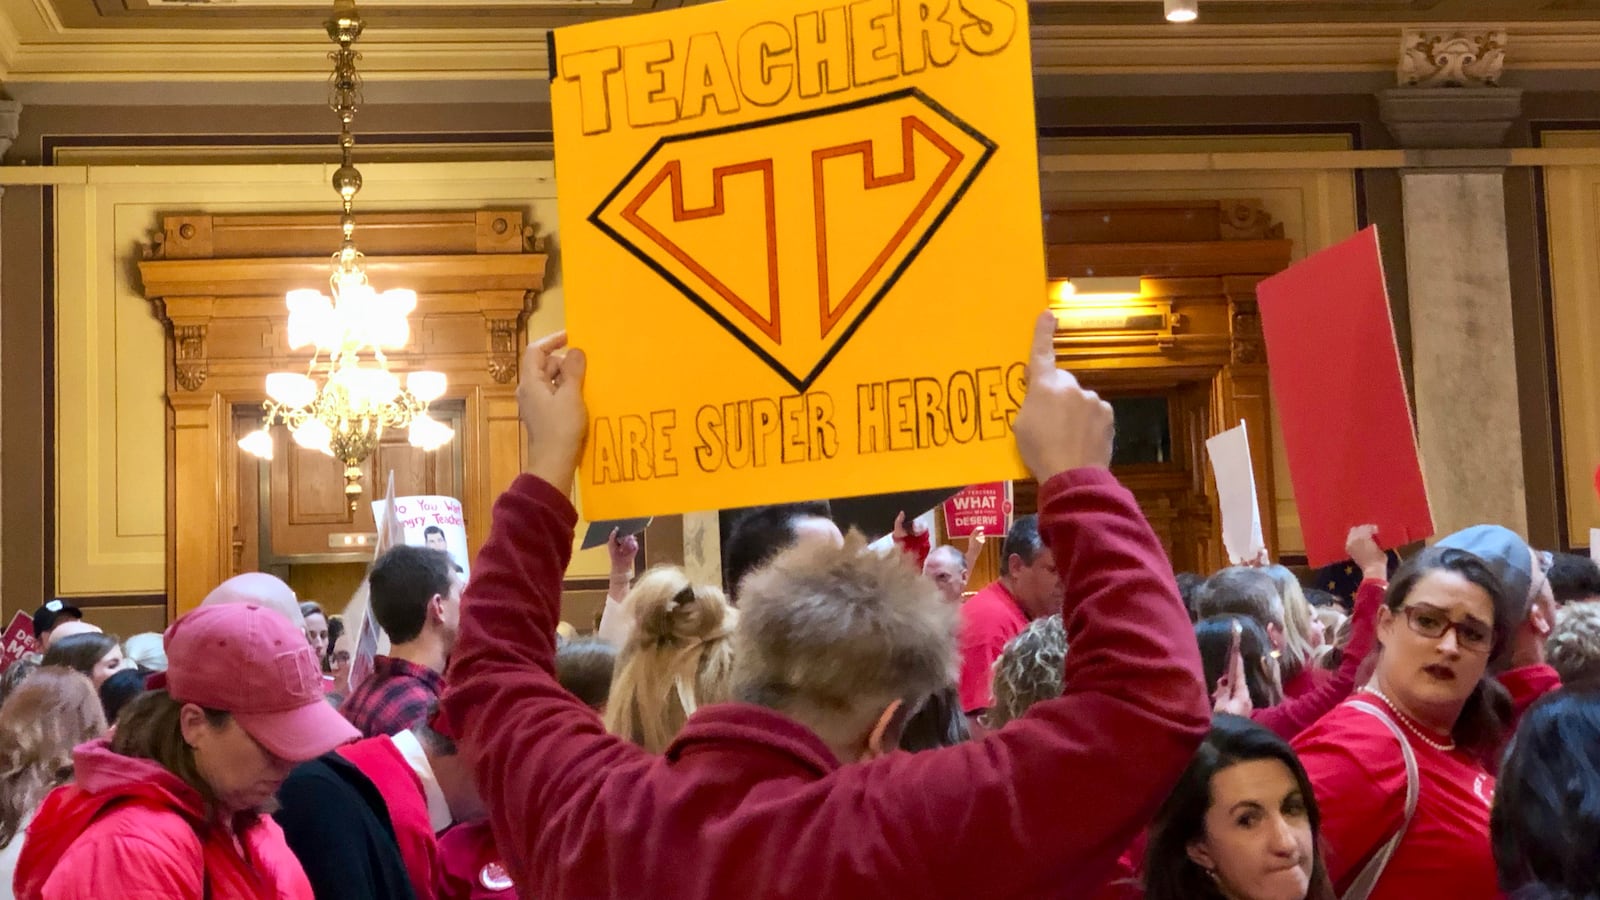 A sign raised in support of teachers at a rally held March 9, 2019 in the Statehouse.